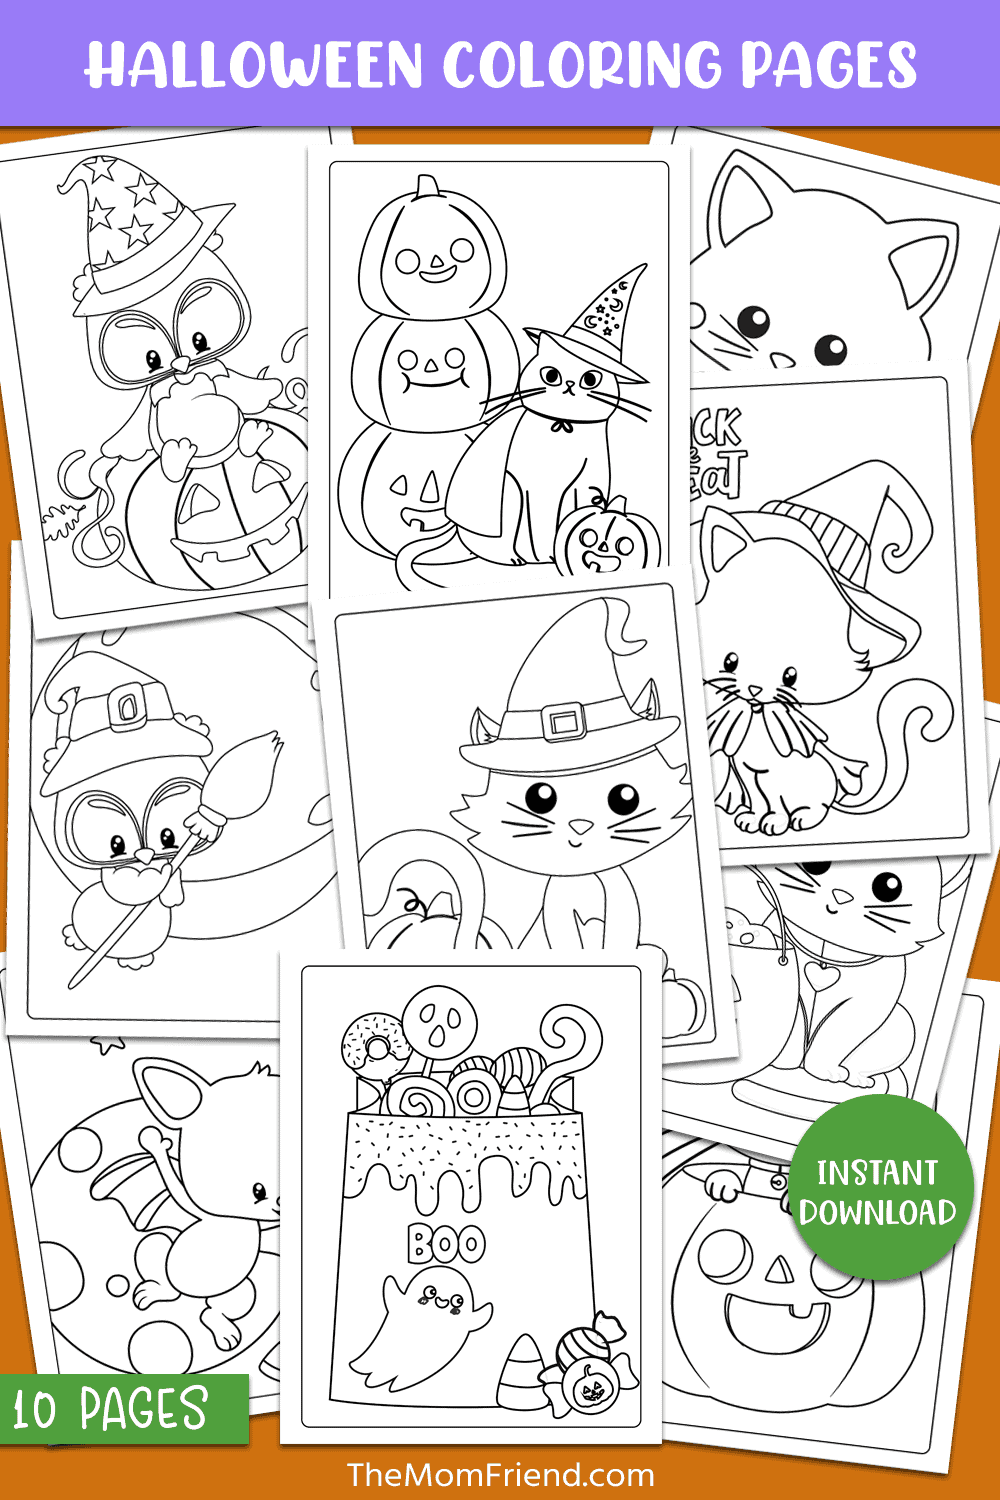 Cute halloween coloring pages to print for free the mom friend